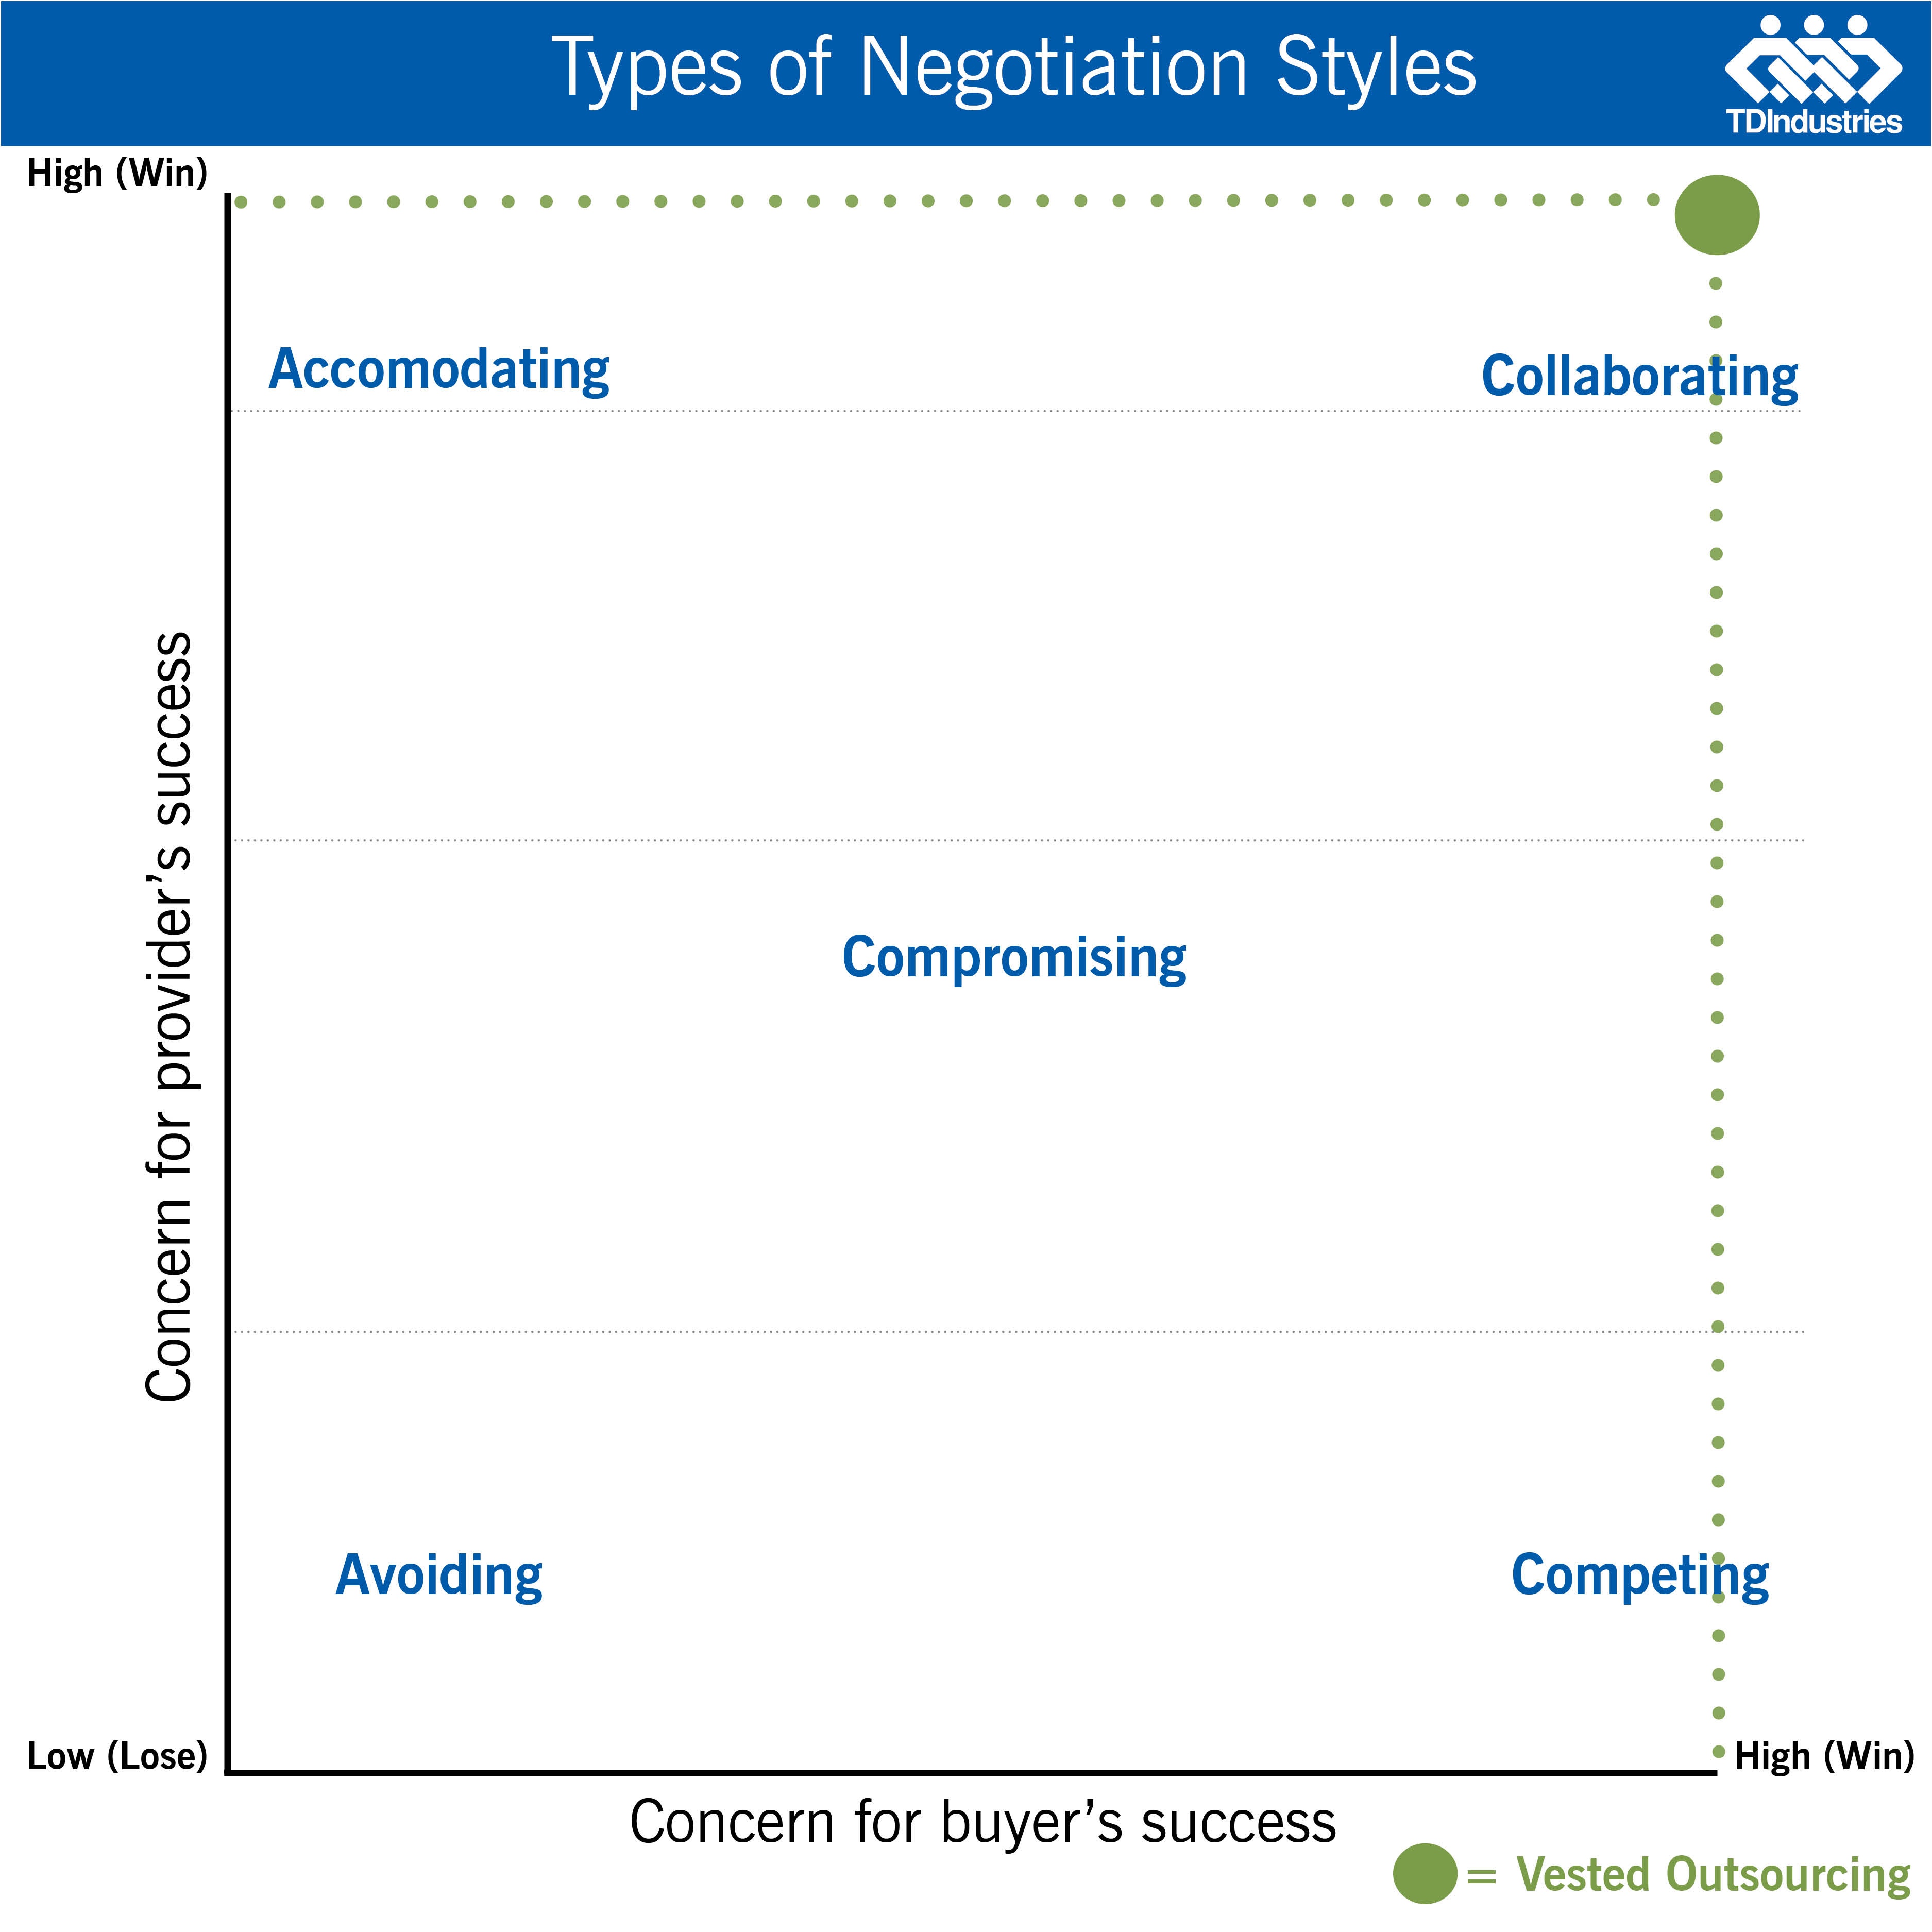 Vested Outsourcing and Negotiation Styles